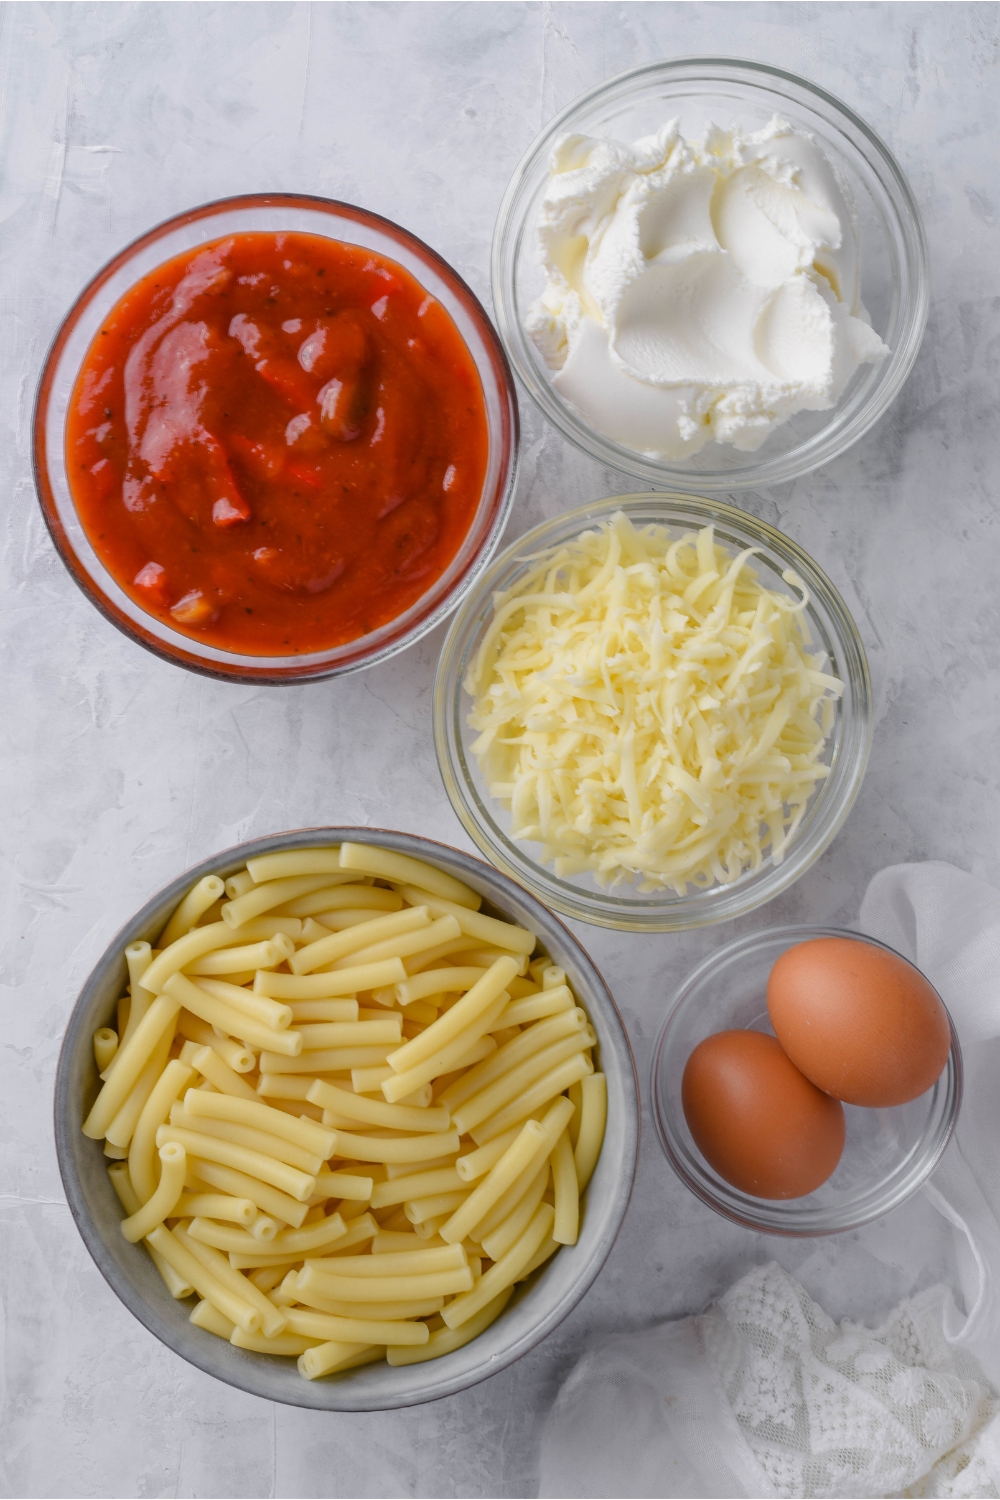 An assortment of ingredients including bowls of ricotta cheese, mozzarella cheese, tomato sauce, cooked ziti pasta, and two eggs.